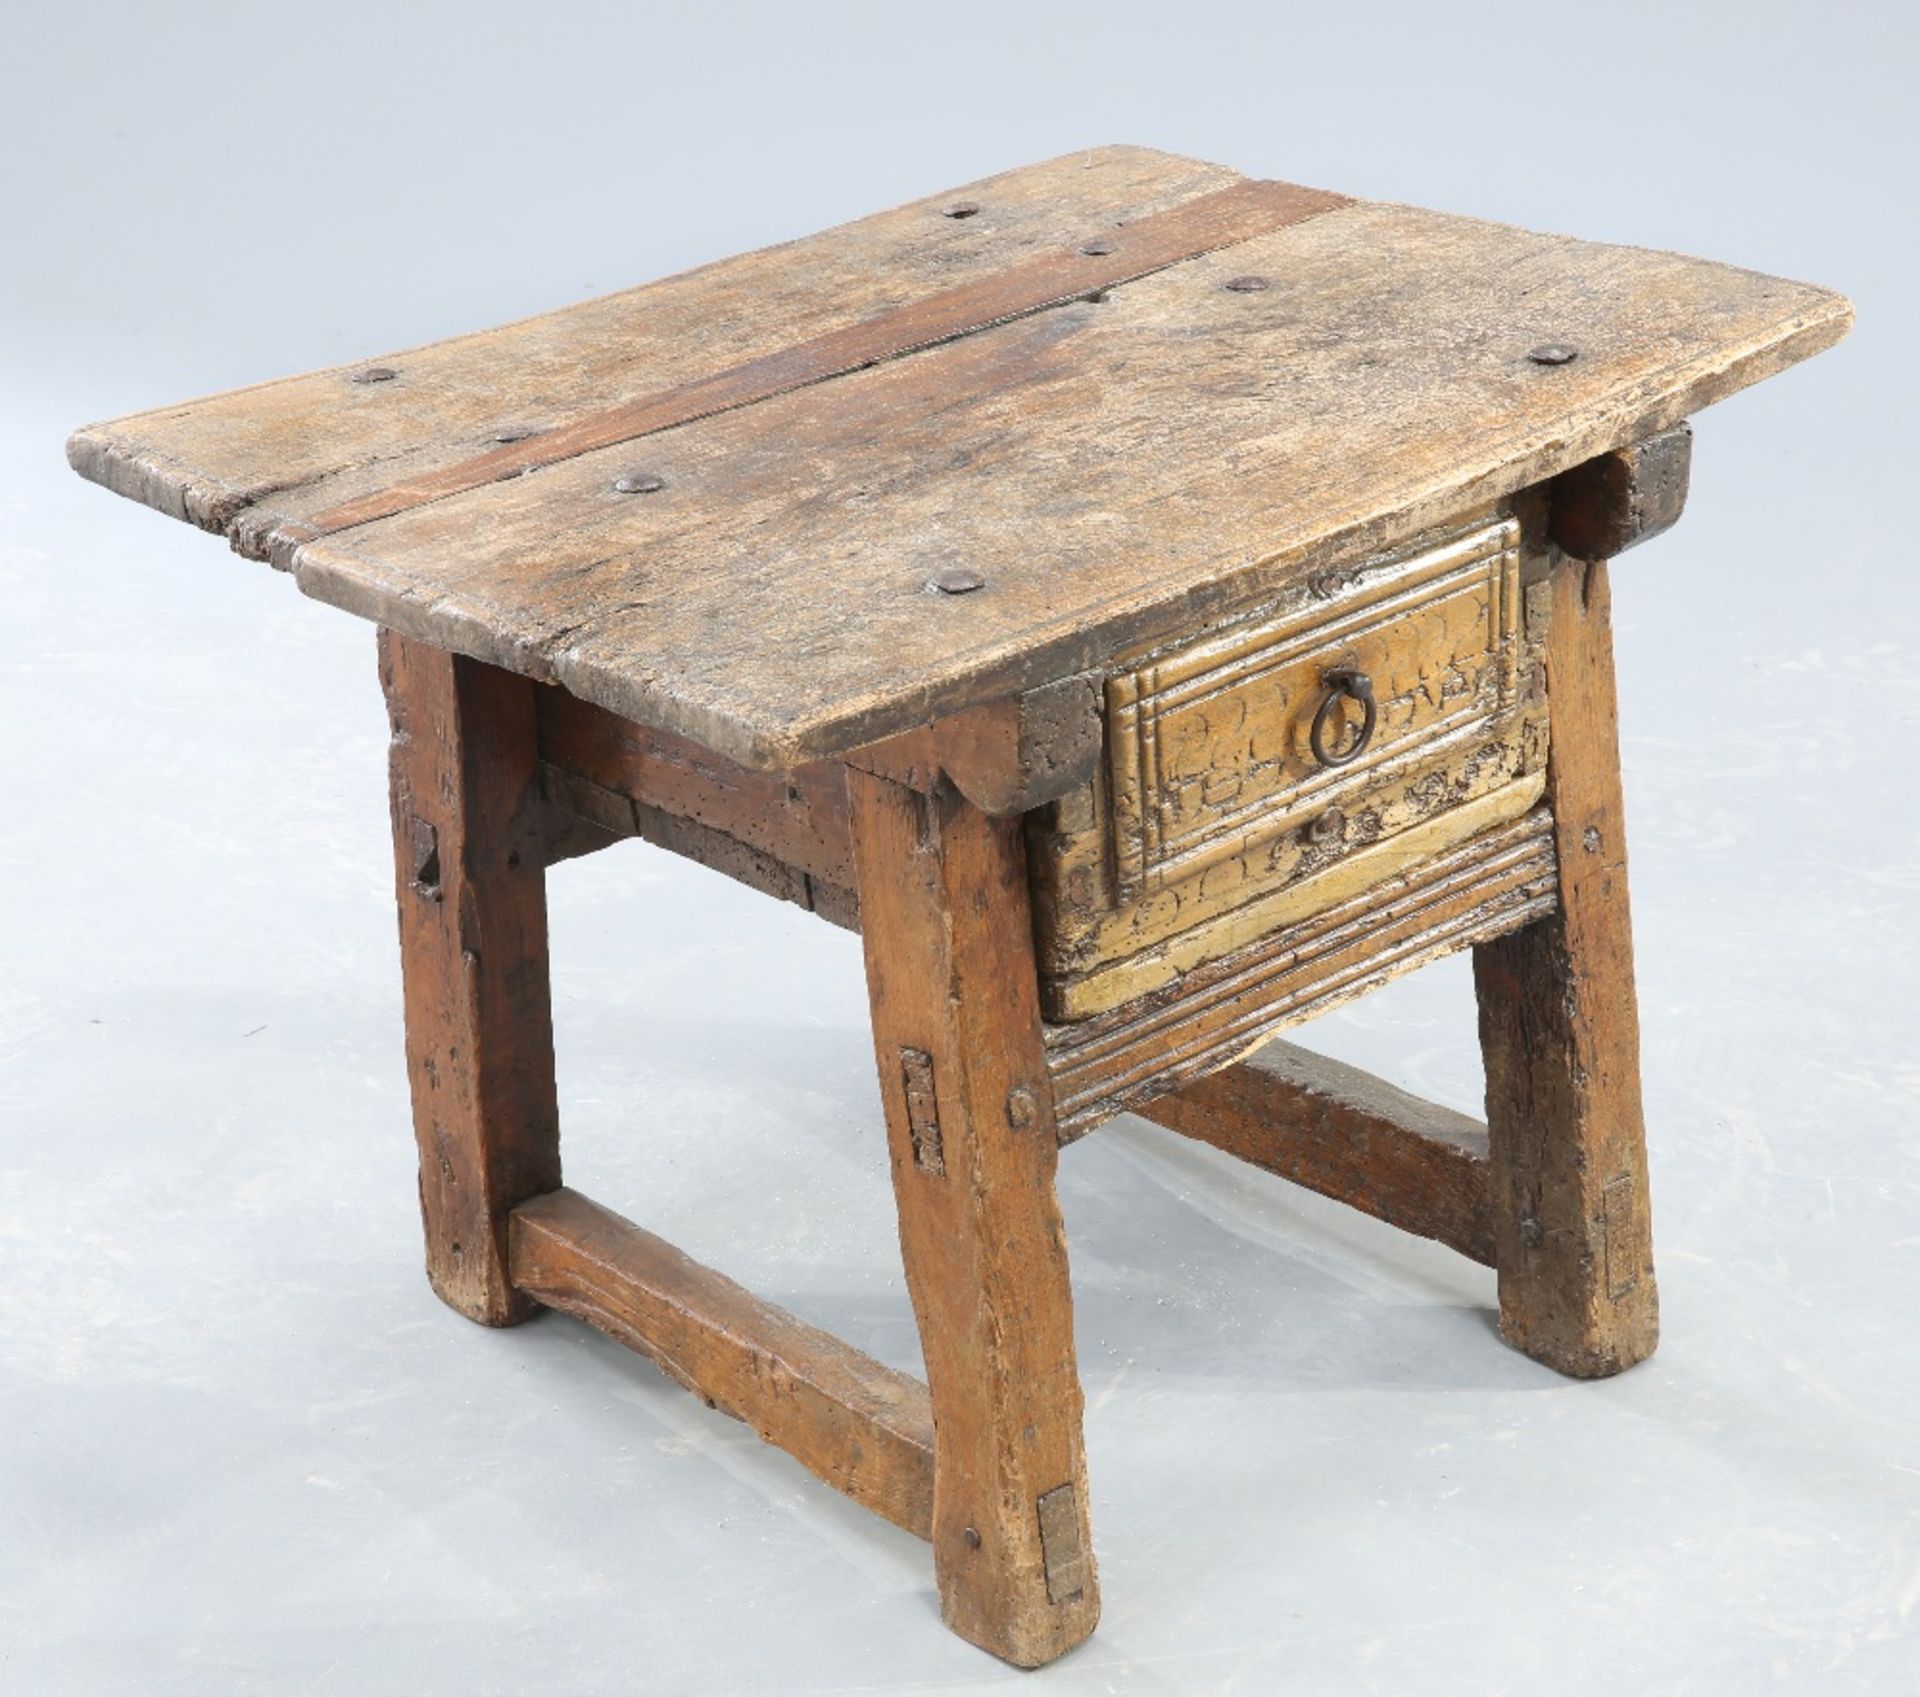 A SPANISH SIDE TABLE, PROBABLY 18TH CENTURY - Image 2 of 3